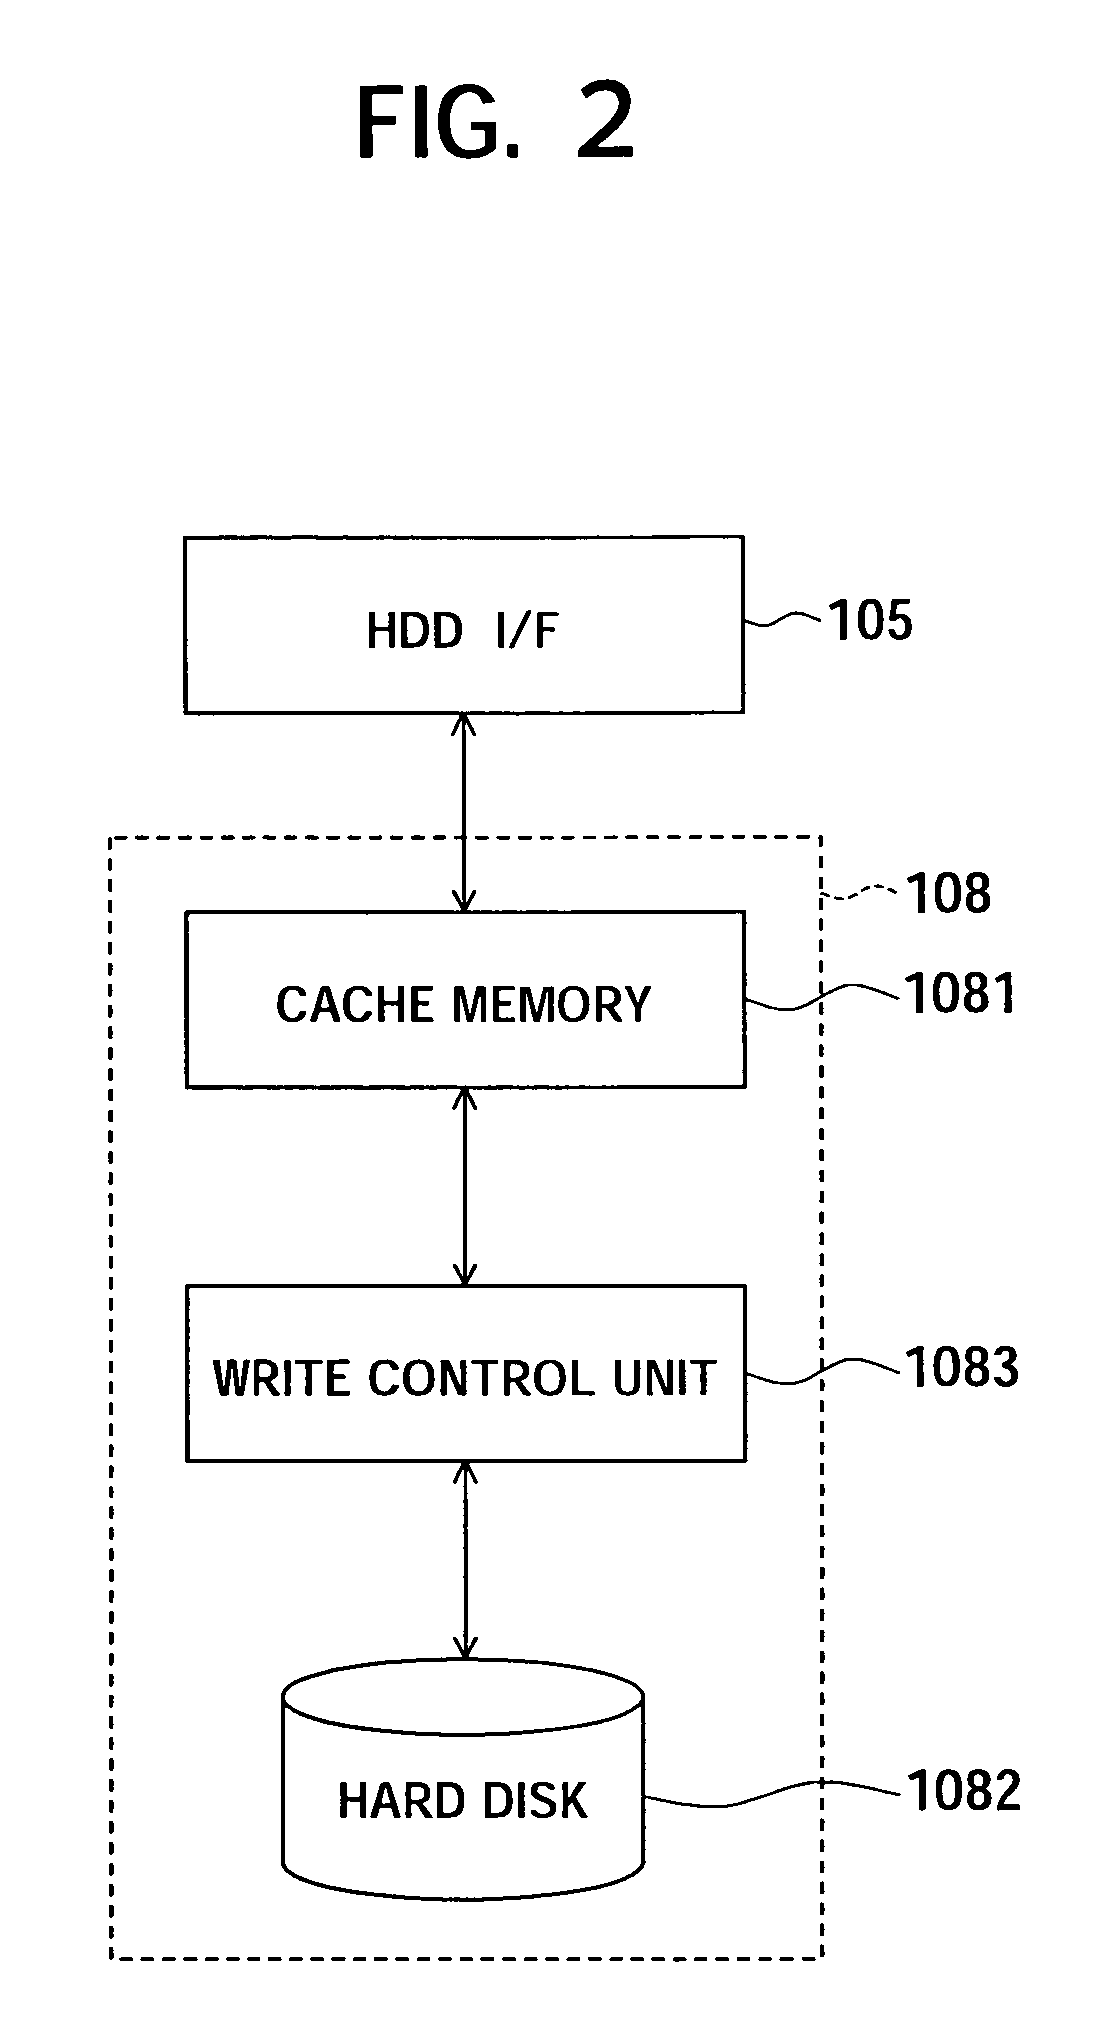 File storage apparatus for storing file data and management information